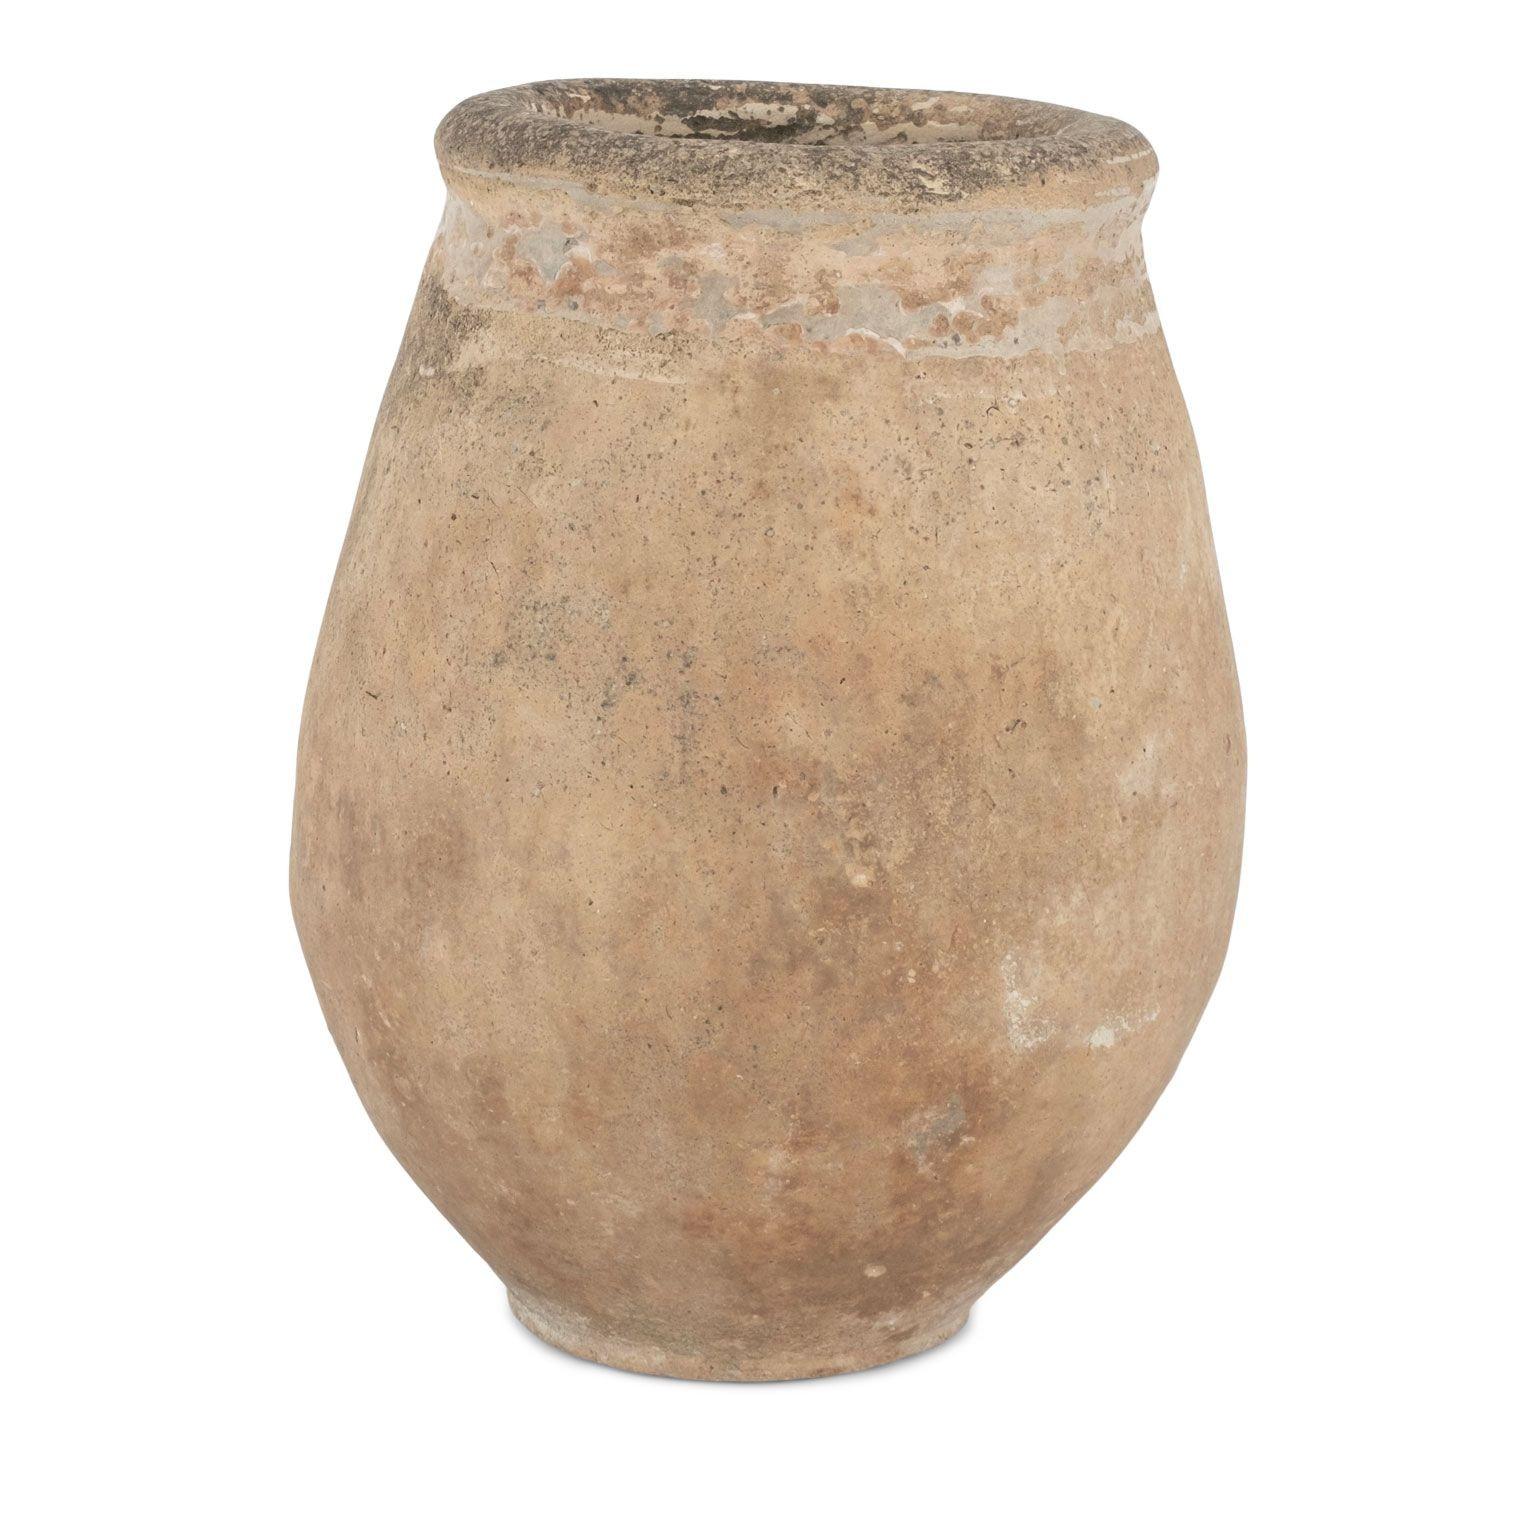 Early French Biot jar with remnants of yellow glaze along its rim. Dates to the late 18th or early 19th century. Nice patina and pitted surface from centuries of natural wear and use.